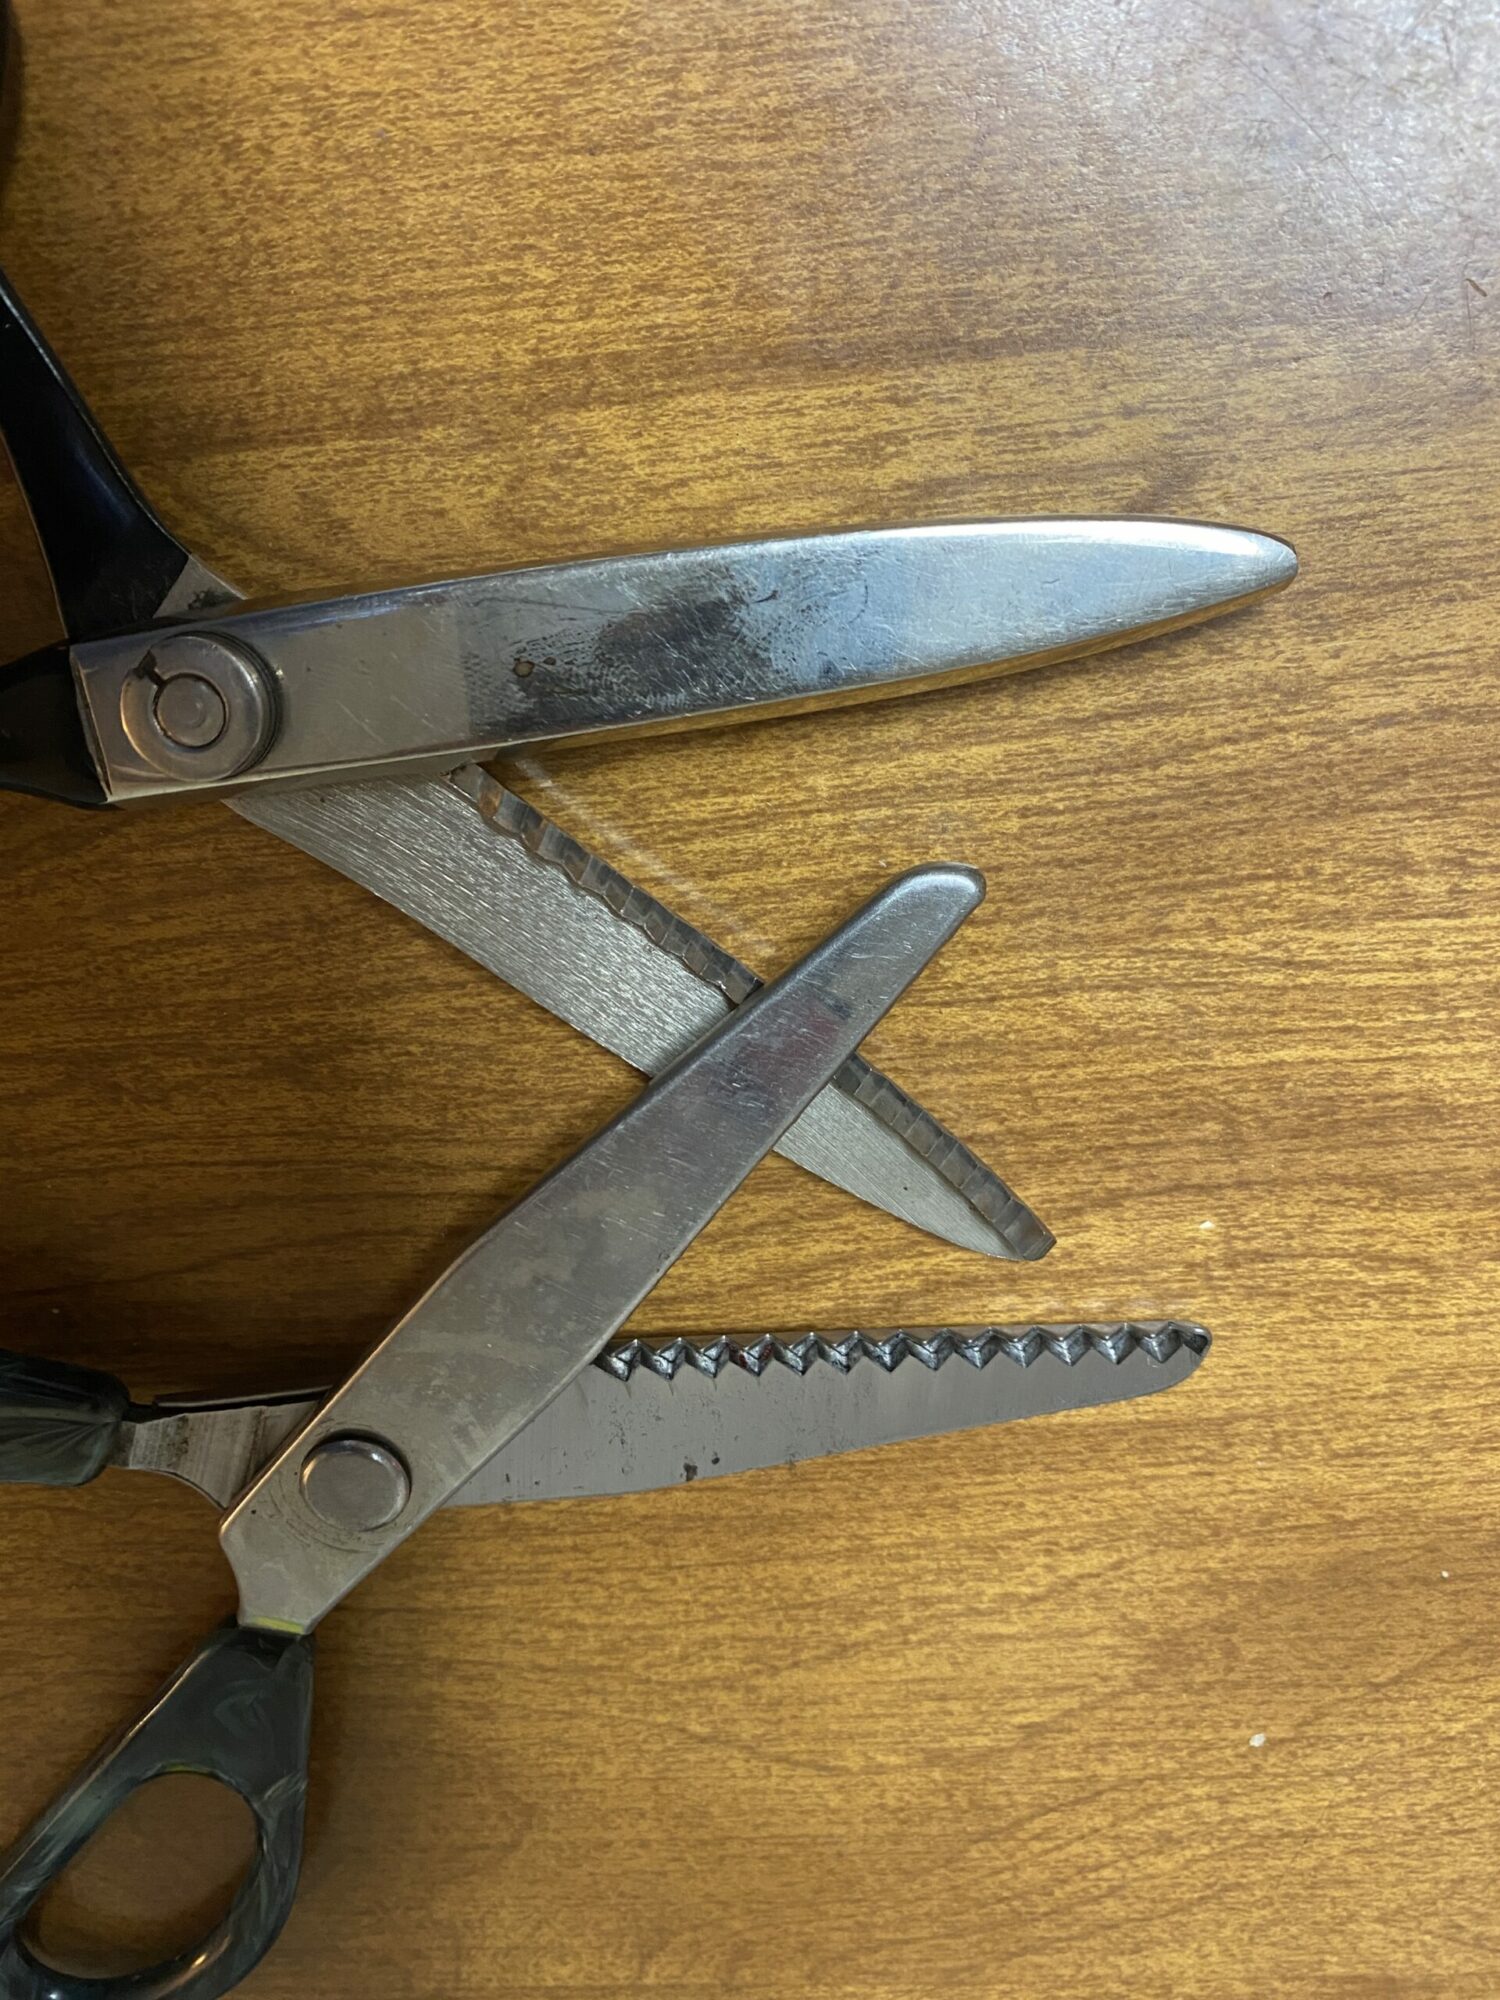 Buying and using the best Pinking Shears for creative edging and preventing  fraying - SewGuide